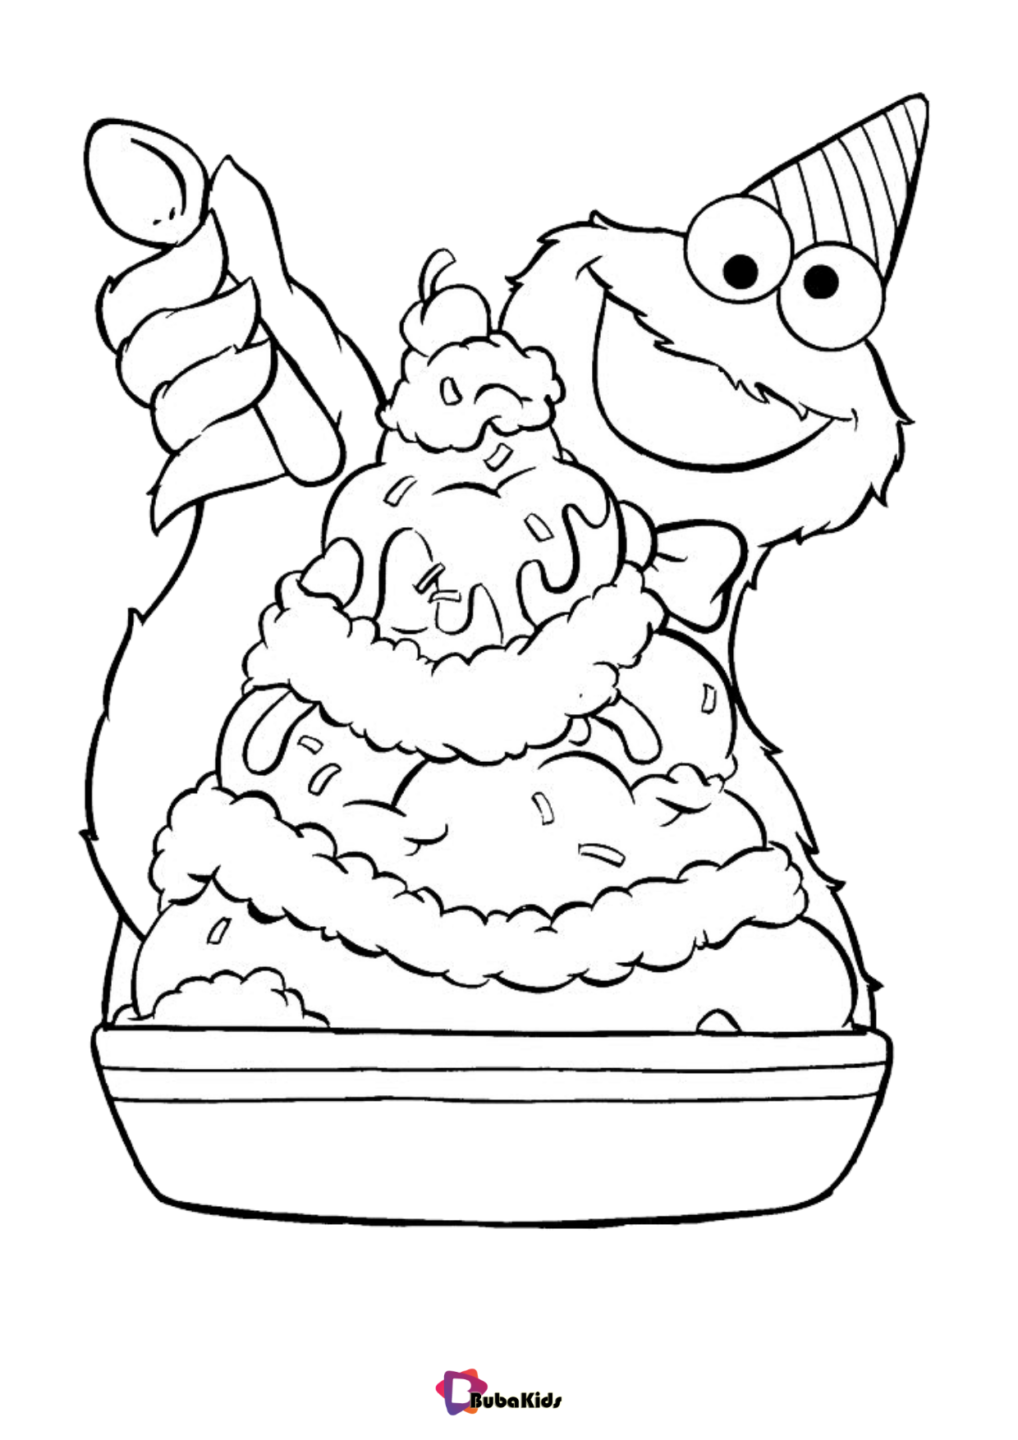 cookie monster and ice cream coloring page